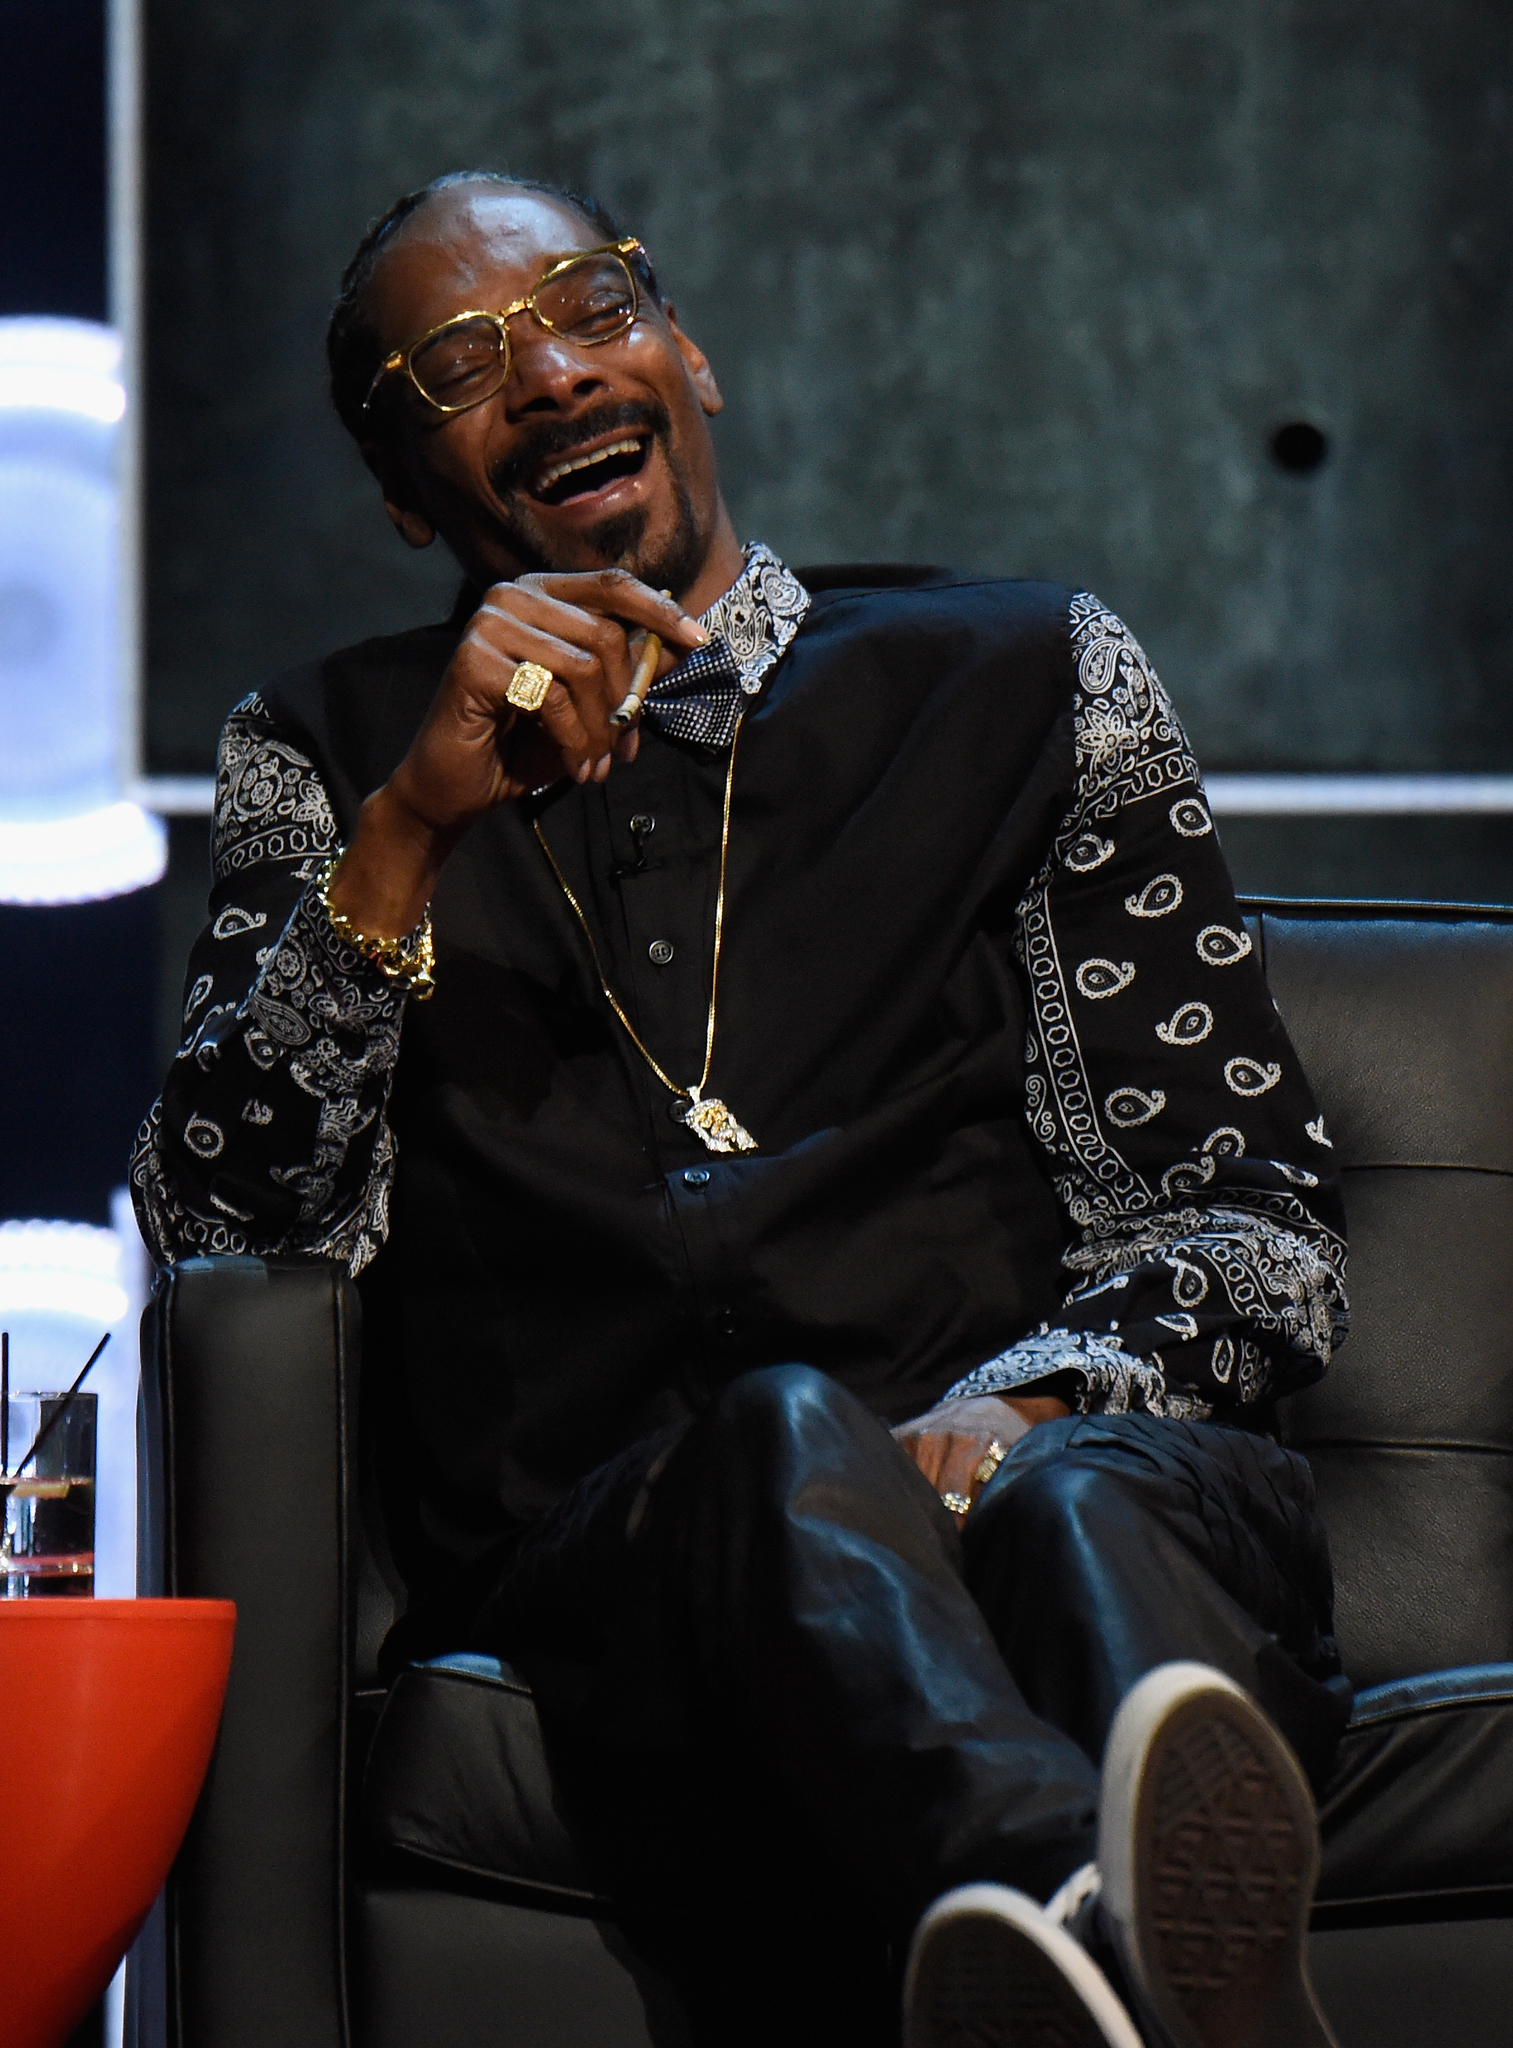 Snoop Dogg at event of Comedy Central Roast of Justin Bieber (2015)